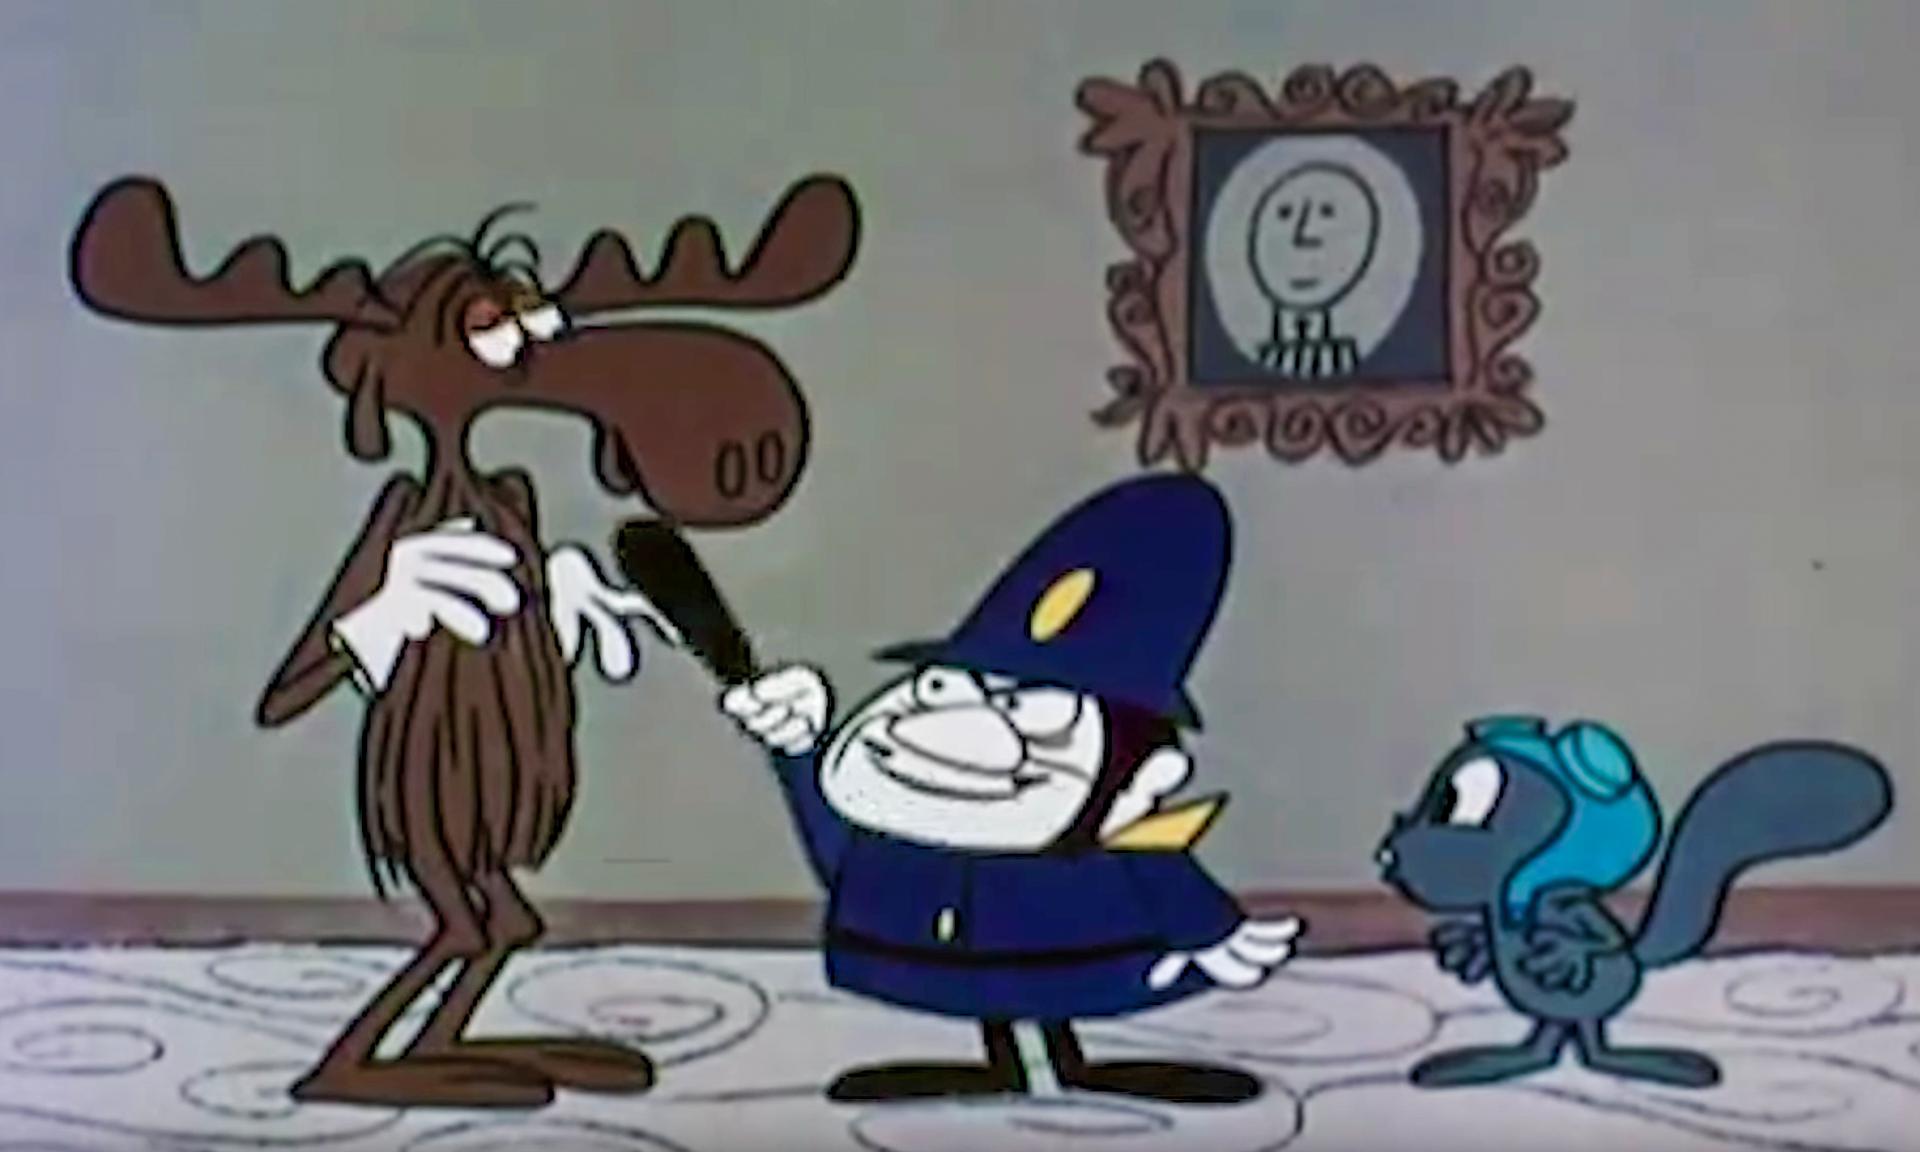 Those kid-friendly Cold-War heroes, Bullwinkle the moose and Rocket J. Squirrel.